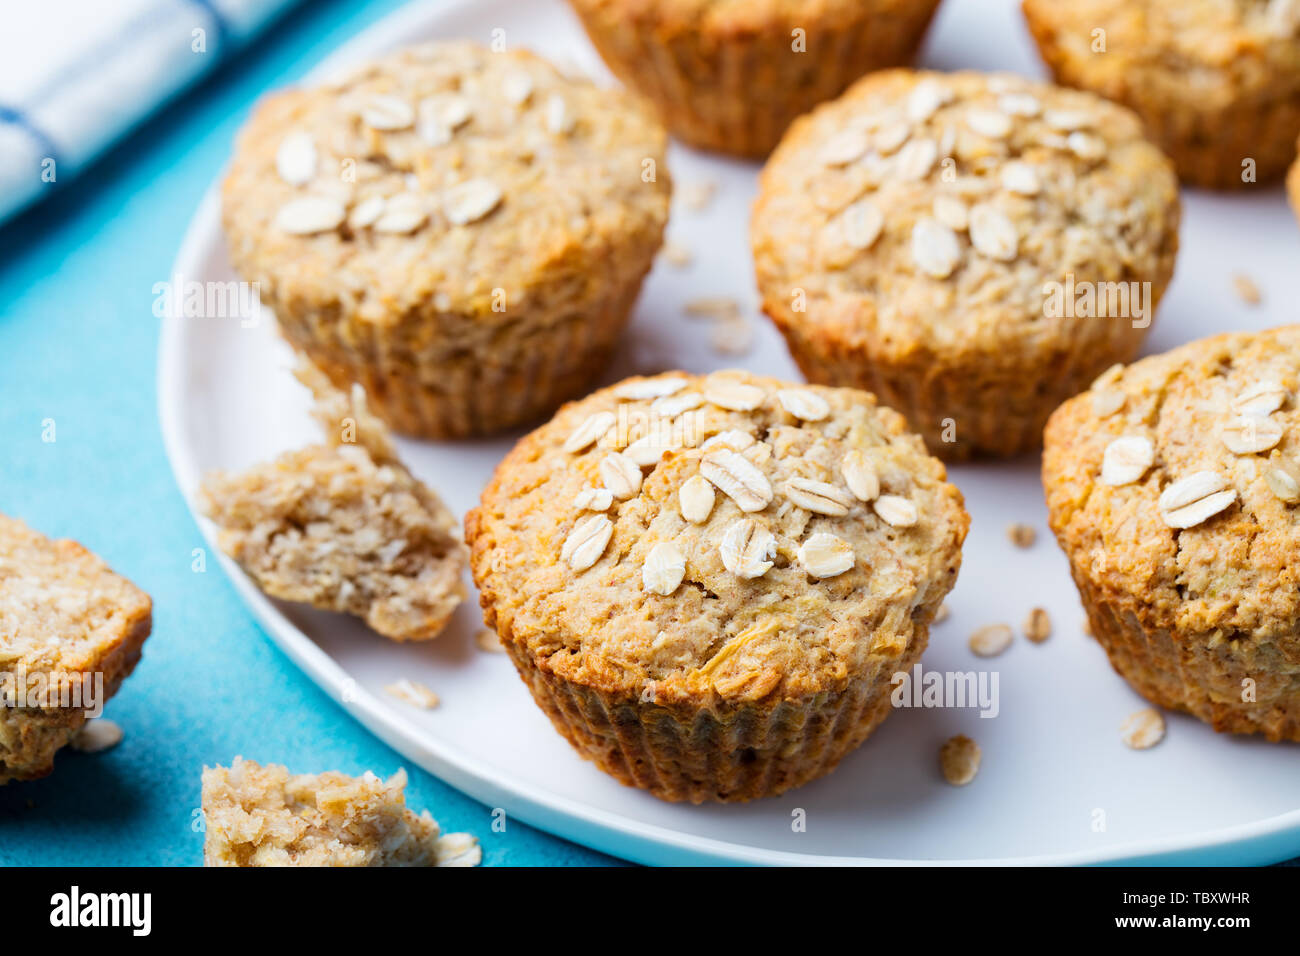 Healthy vegan oat muffins, apple and banana cakes on a white plate. Blue background. Stock Photo